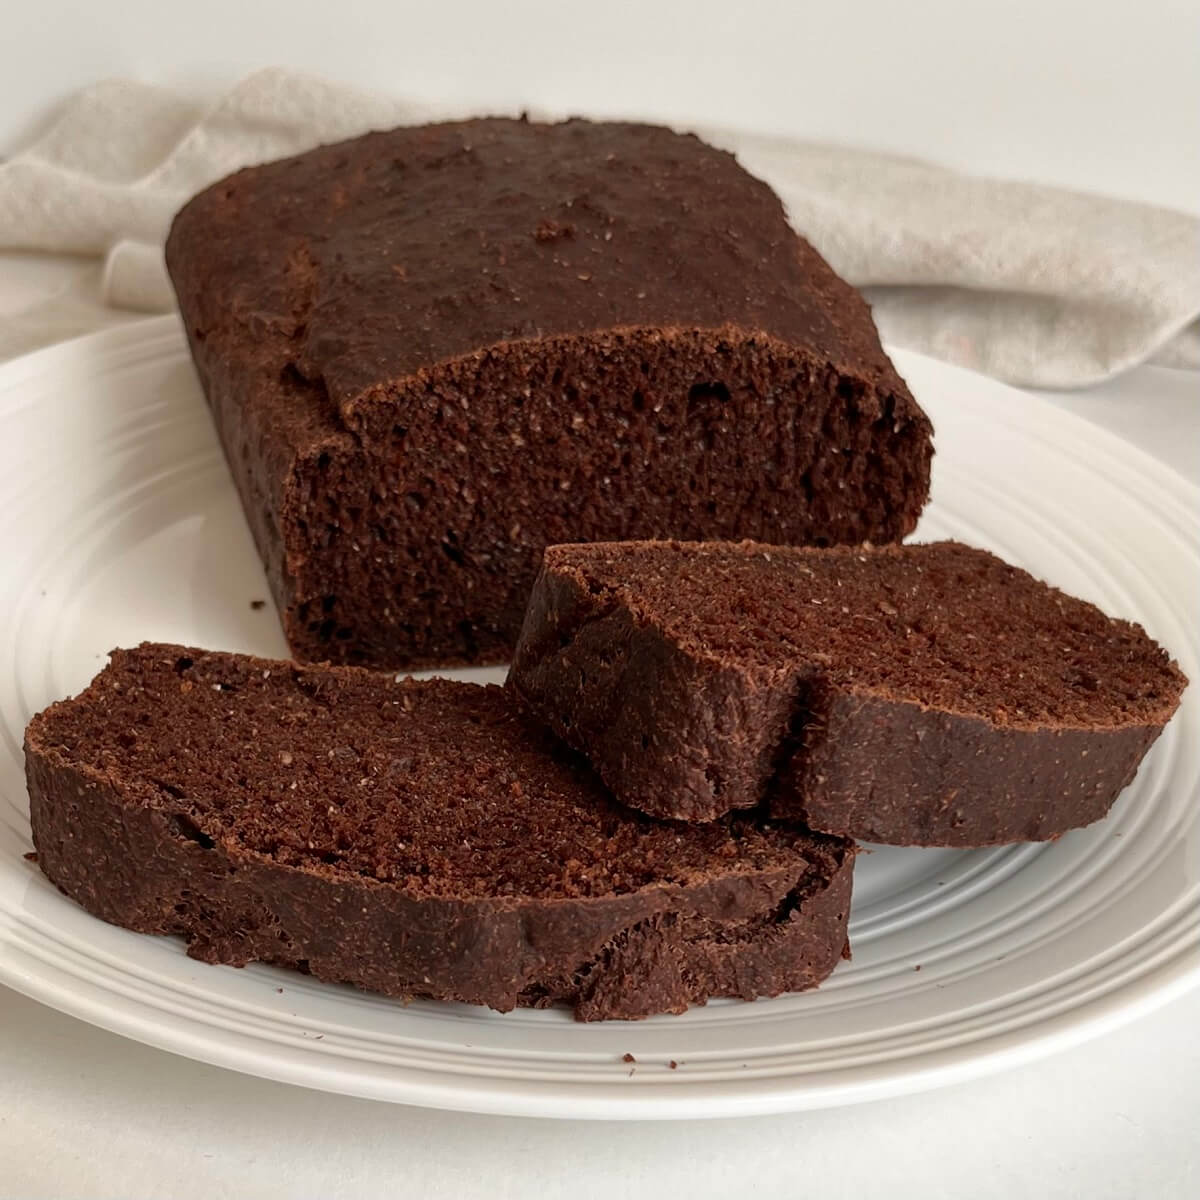 A loaf of no-knead chocolate bread with two thick slices cut.